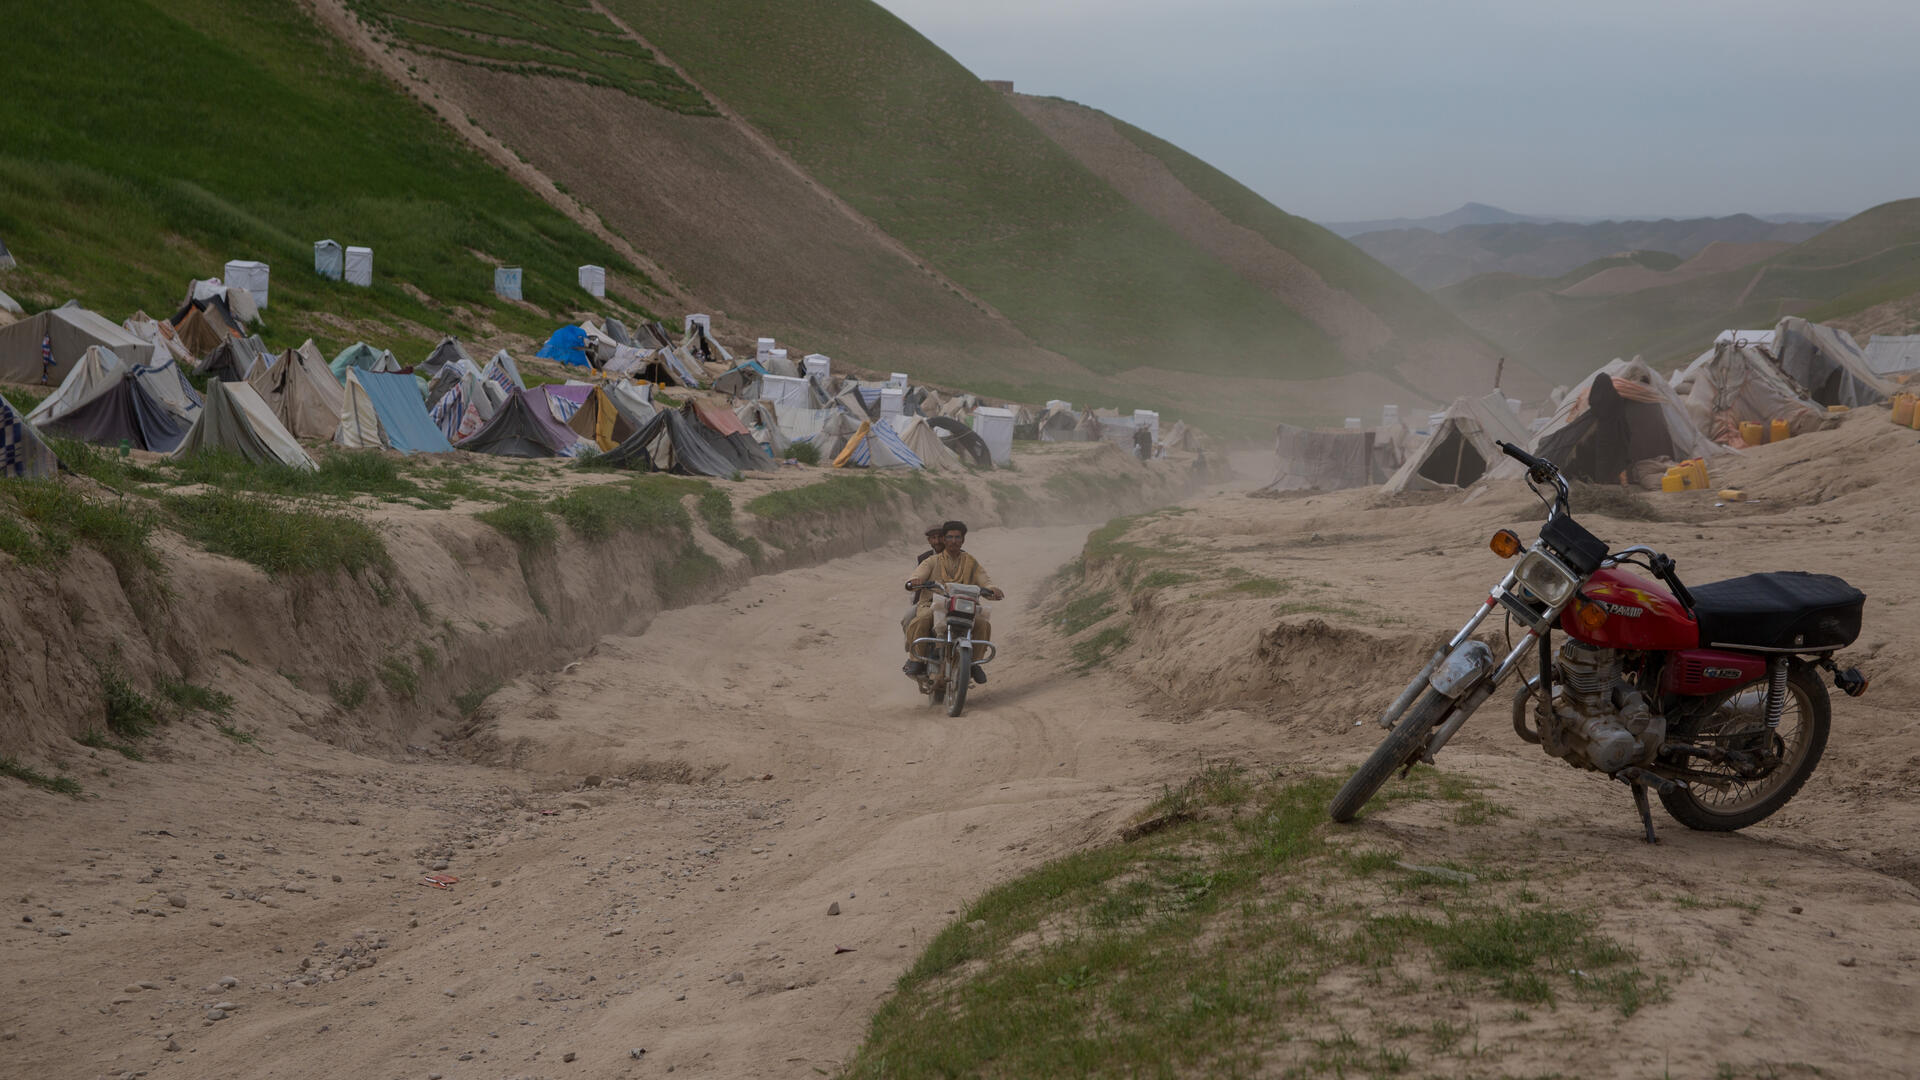 A camp for drought displaced people in Afghanistan. there is a motorcycle in the foreground as well as two men on a motorcycle on the road, and tents in the background on a mountainous landscape.